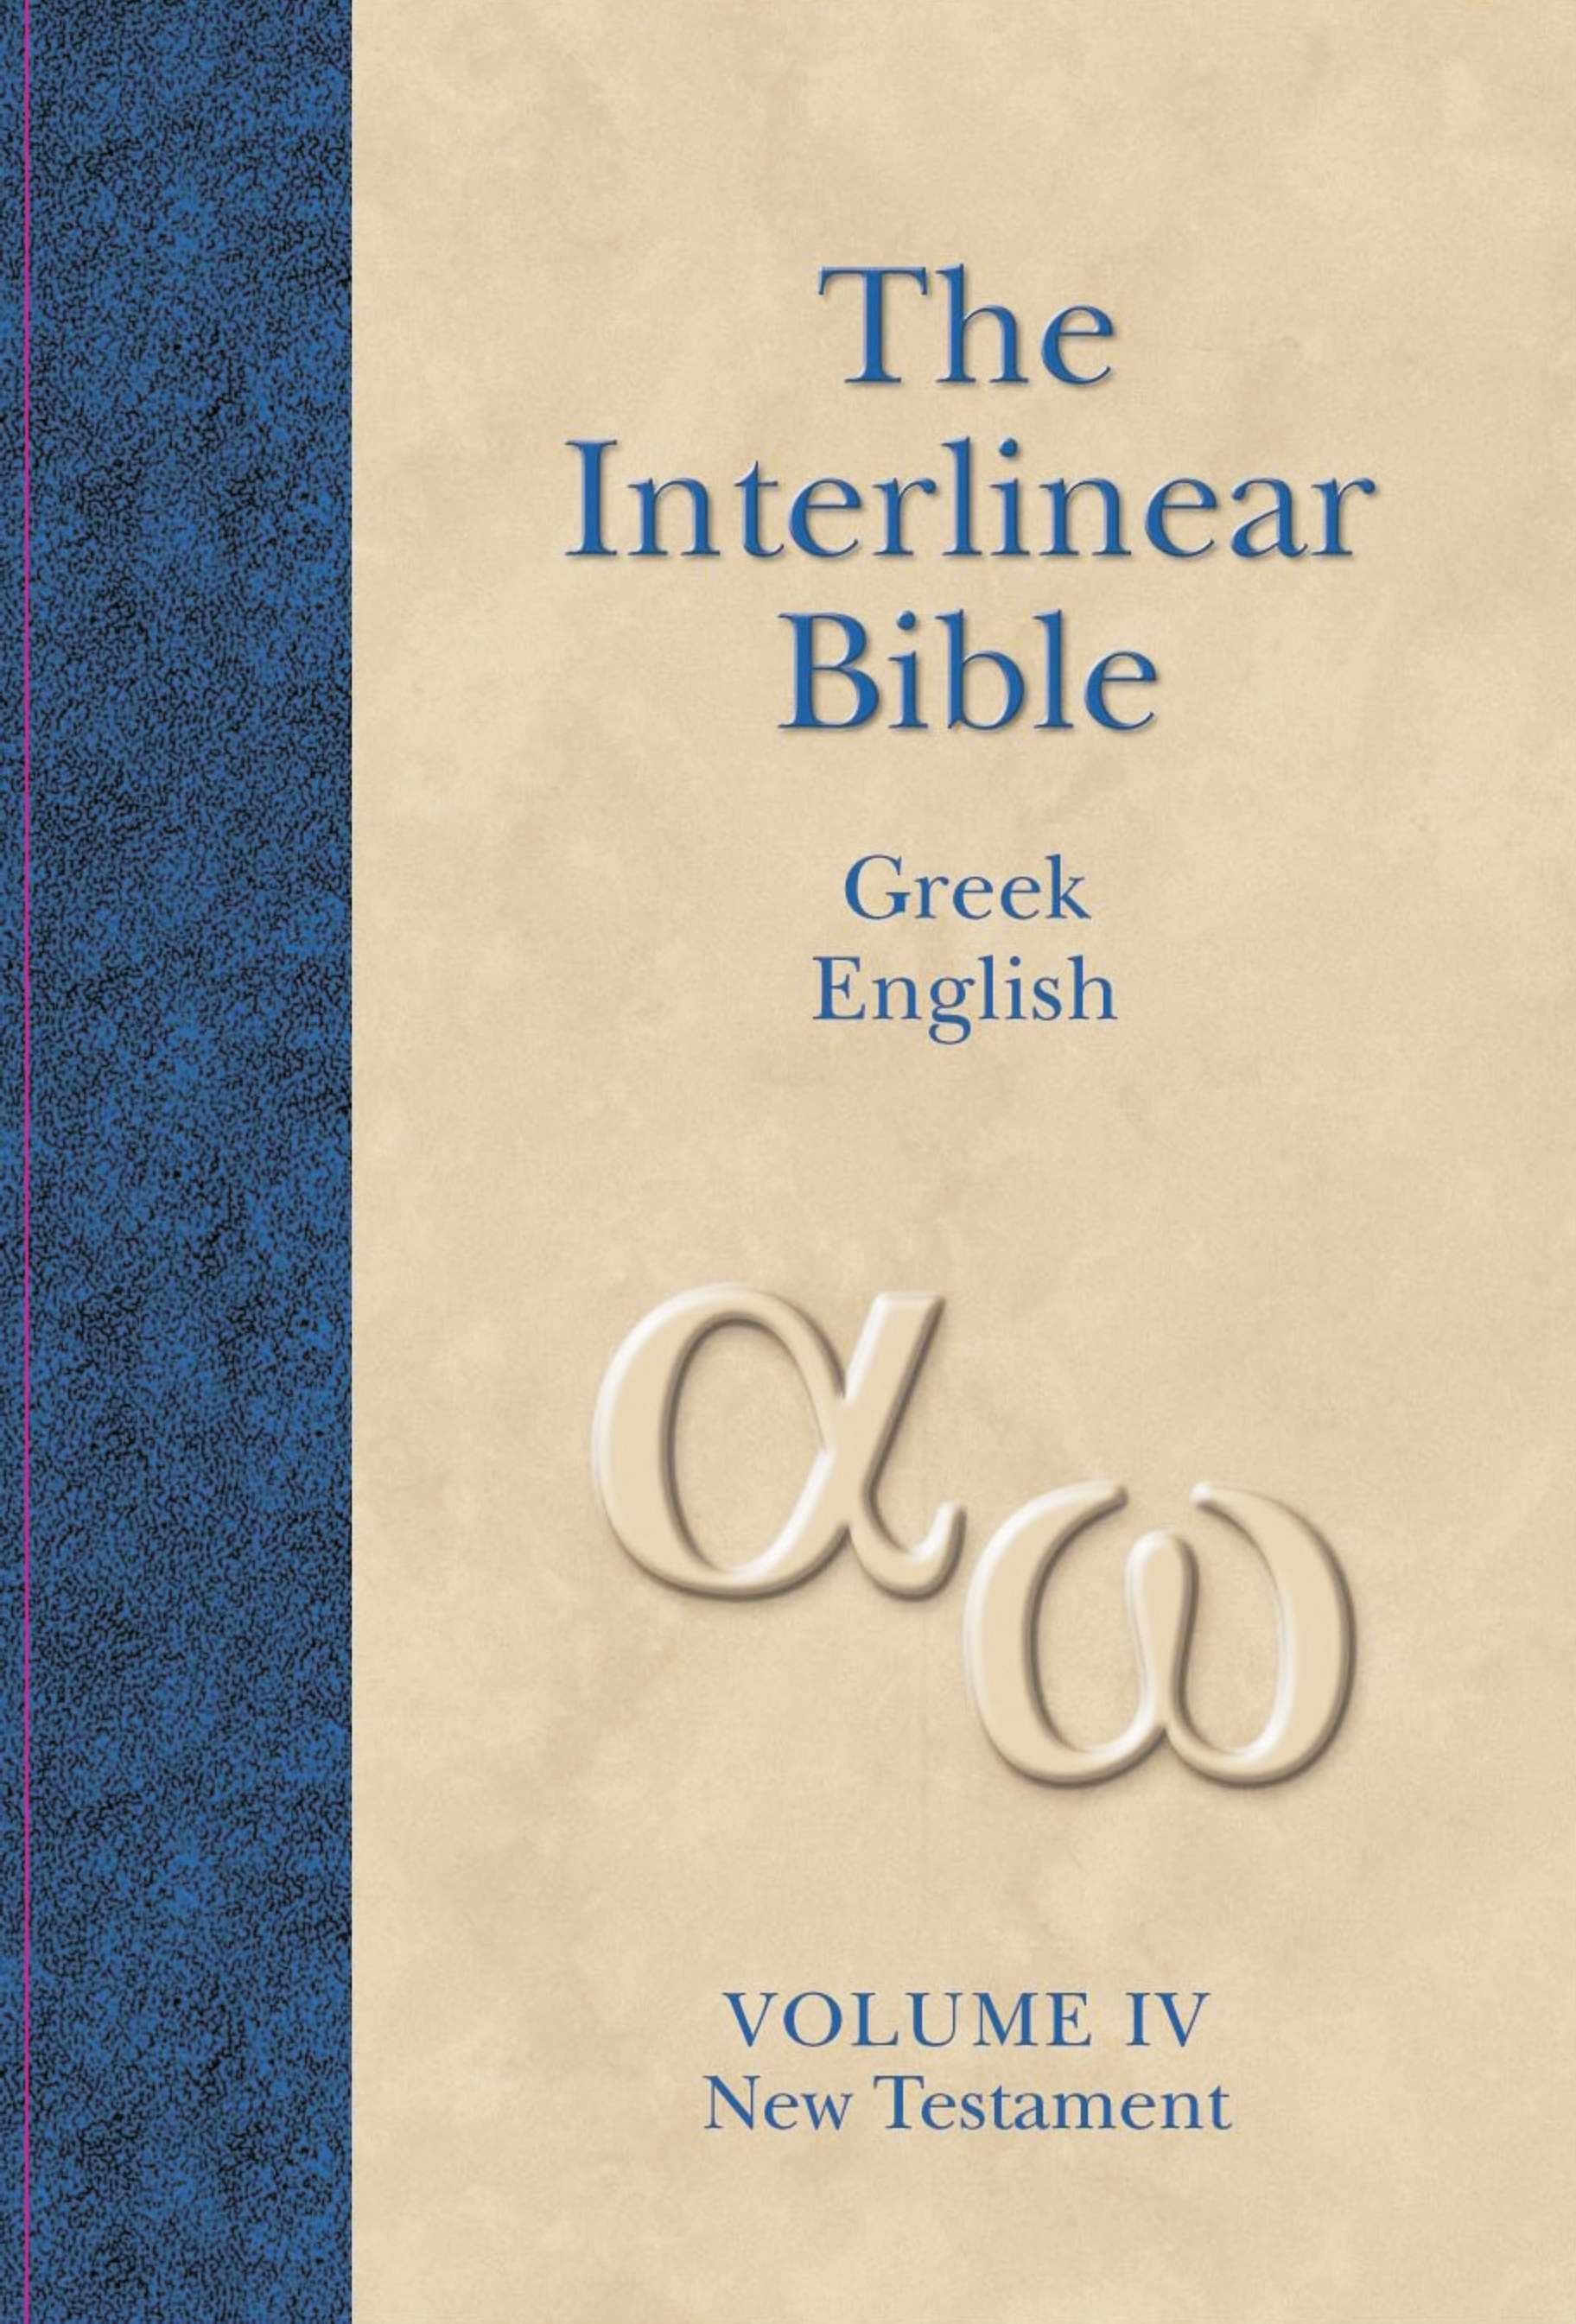 Image of Interlinear Greek - English New Testament Vol 4  other